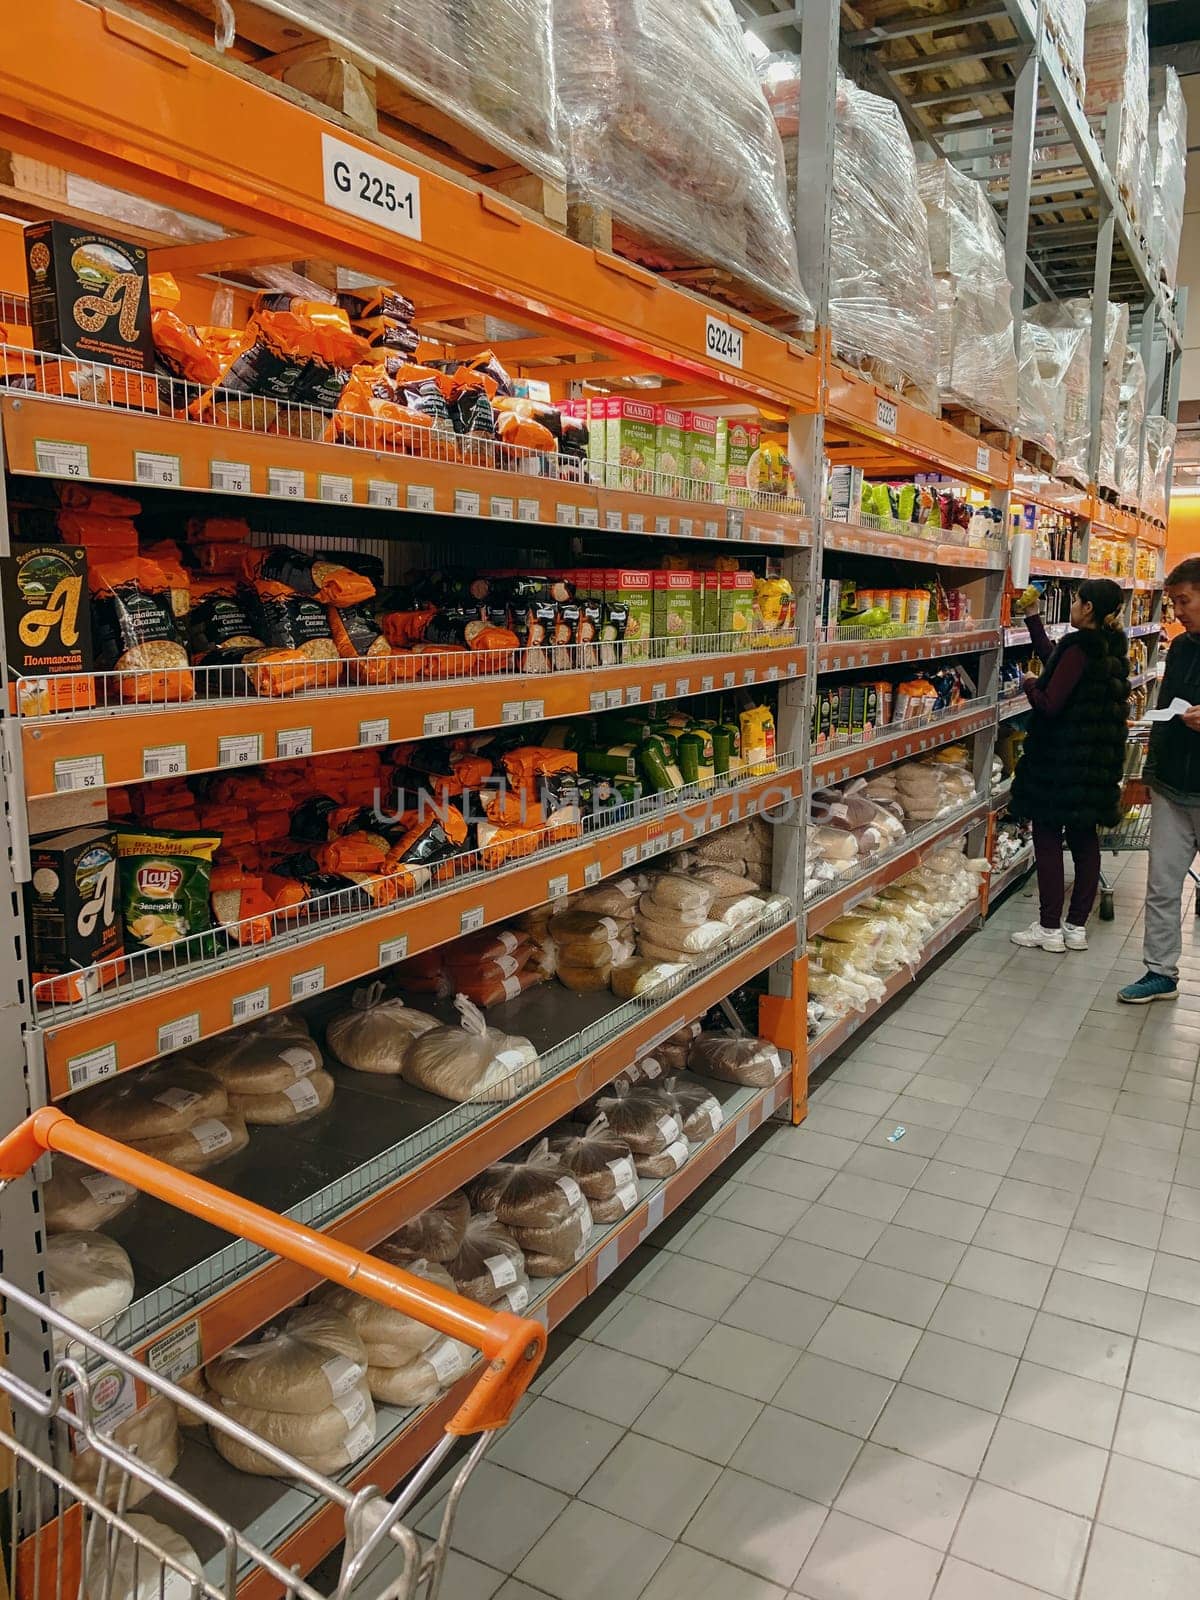 Bishkek, Kyrgyzstan - October 27, 2019: Supermarket. Megastore aisle with colorful shelves and unrecognizable customers as background.